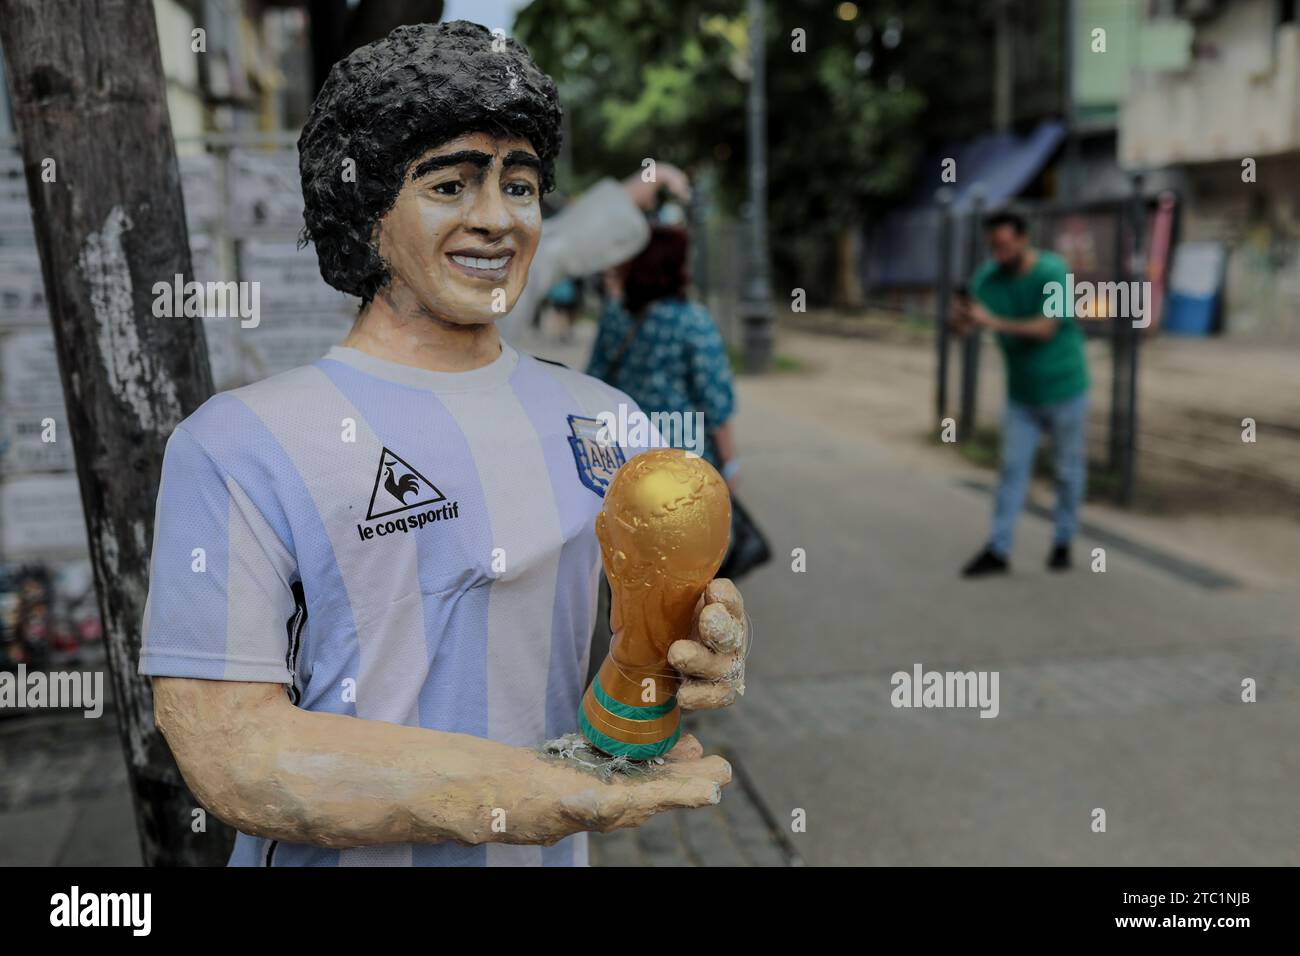 A statue of the late Argentine soccer player, Diego Maradona, seen in the 'caminitos' sector, before the change of government amid economic and social upheaval. President-elect Javier Milei of La Libertad Avanza, a far-right libertarian who burst onto the Argentine political scene with eccentric and radical proposals, will take office on Sunday, December 10, replacing incumbent Peronist Alberto Fernández. Milei describes himself as an 'anarcho-capitalist' libertarian who wants to drastically reduce the size of the state and replace the local peso with the US dollar. The new administration will Stock Photo